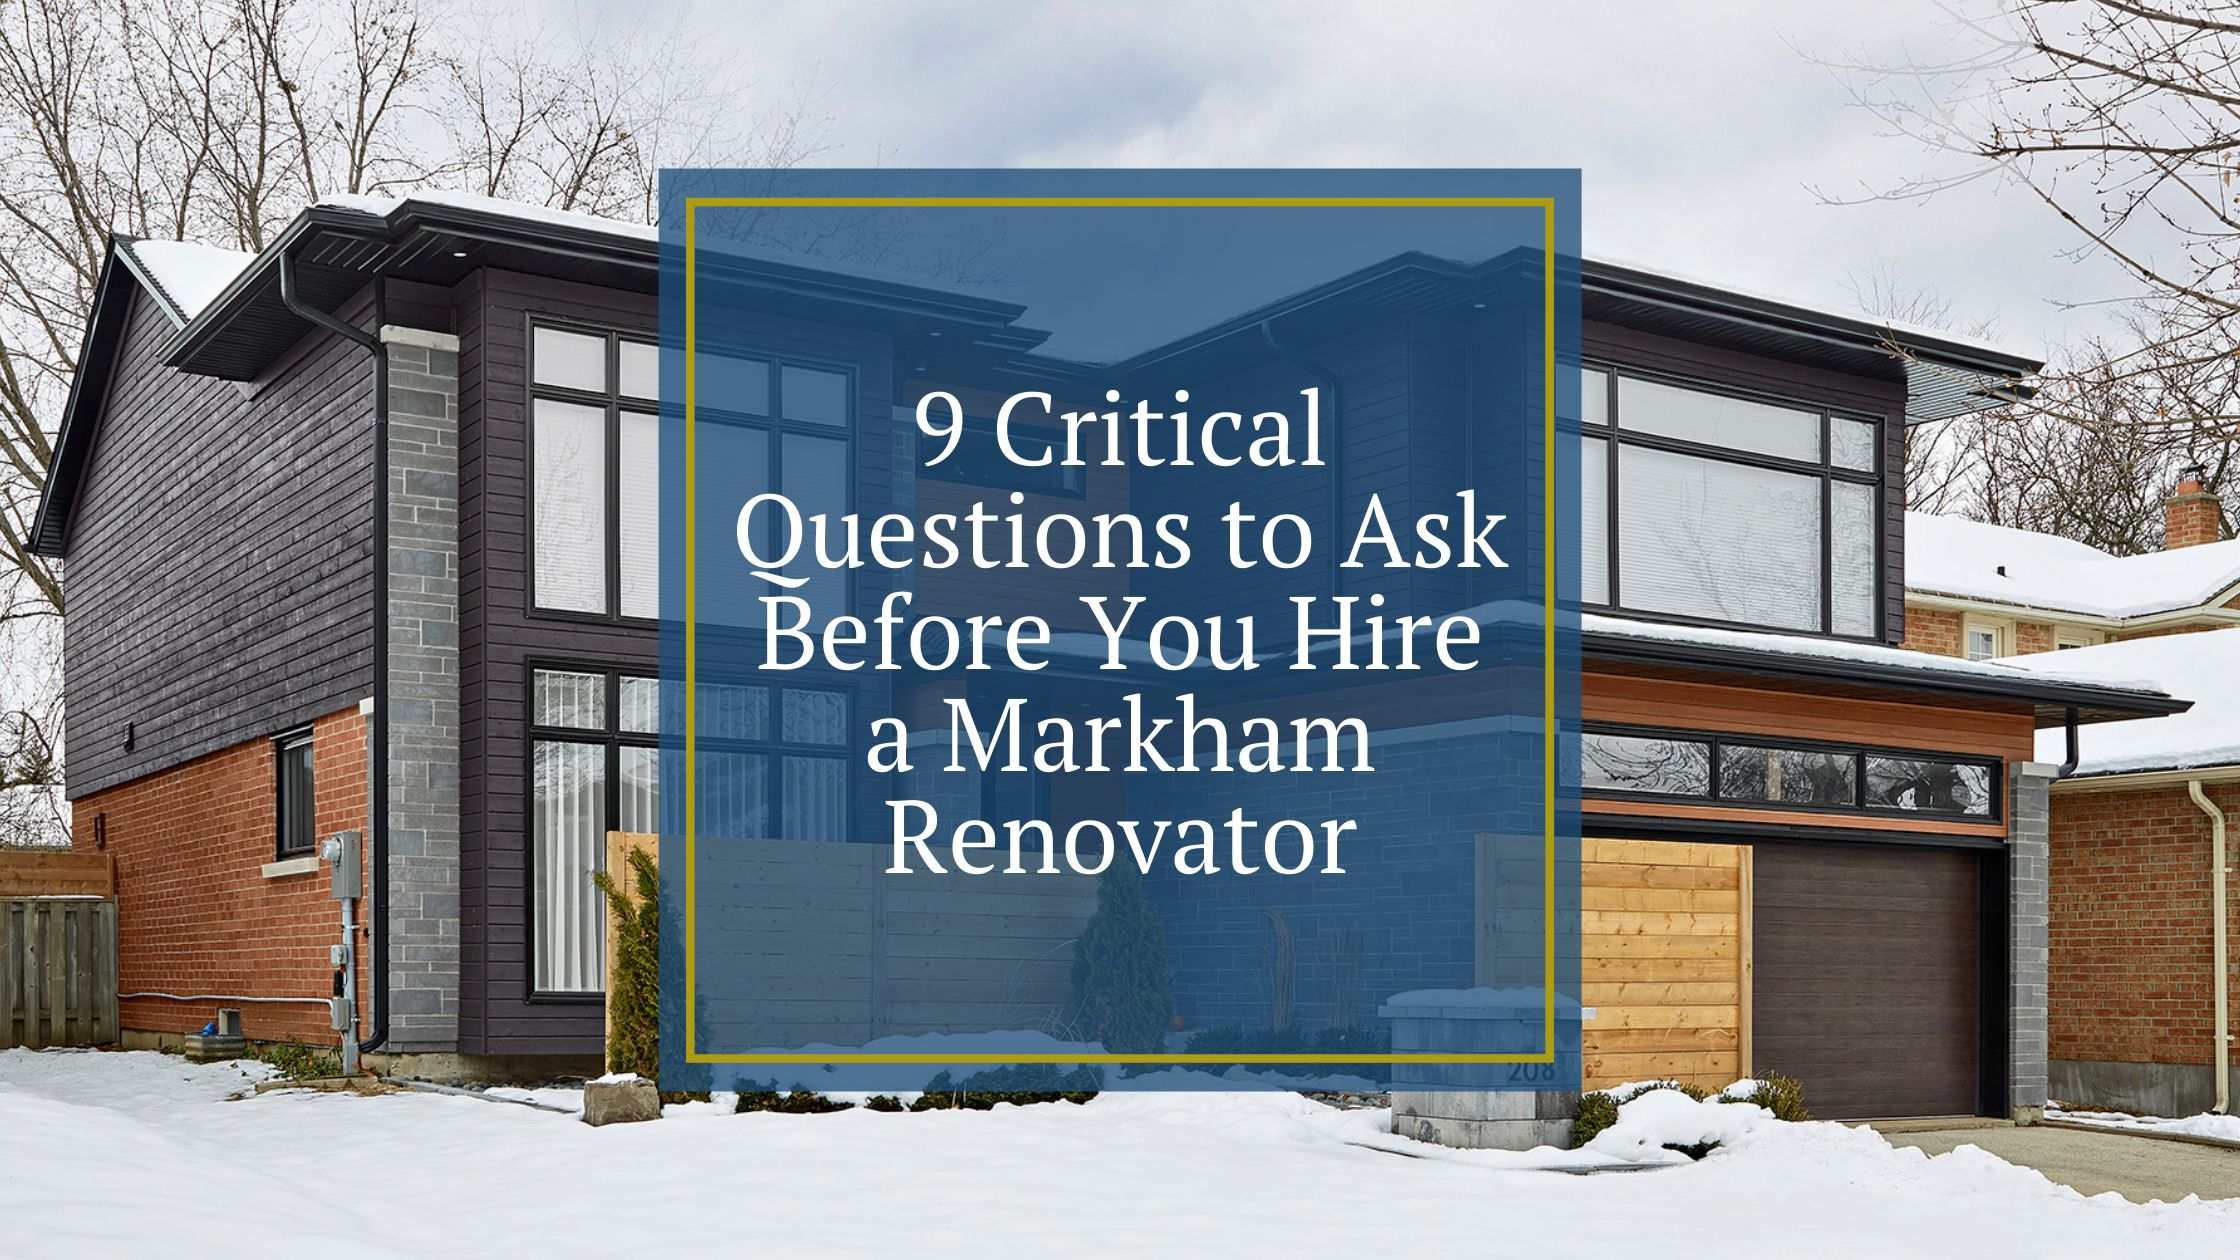 9 Critical Questions to Ask Before You Hire a Markham Renovator